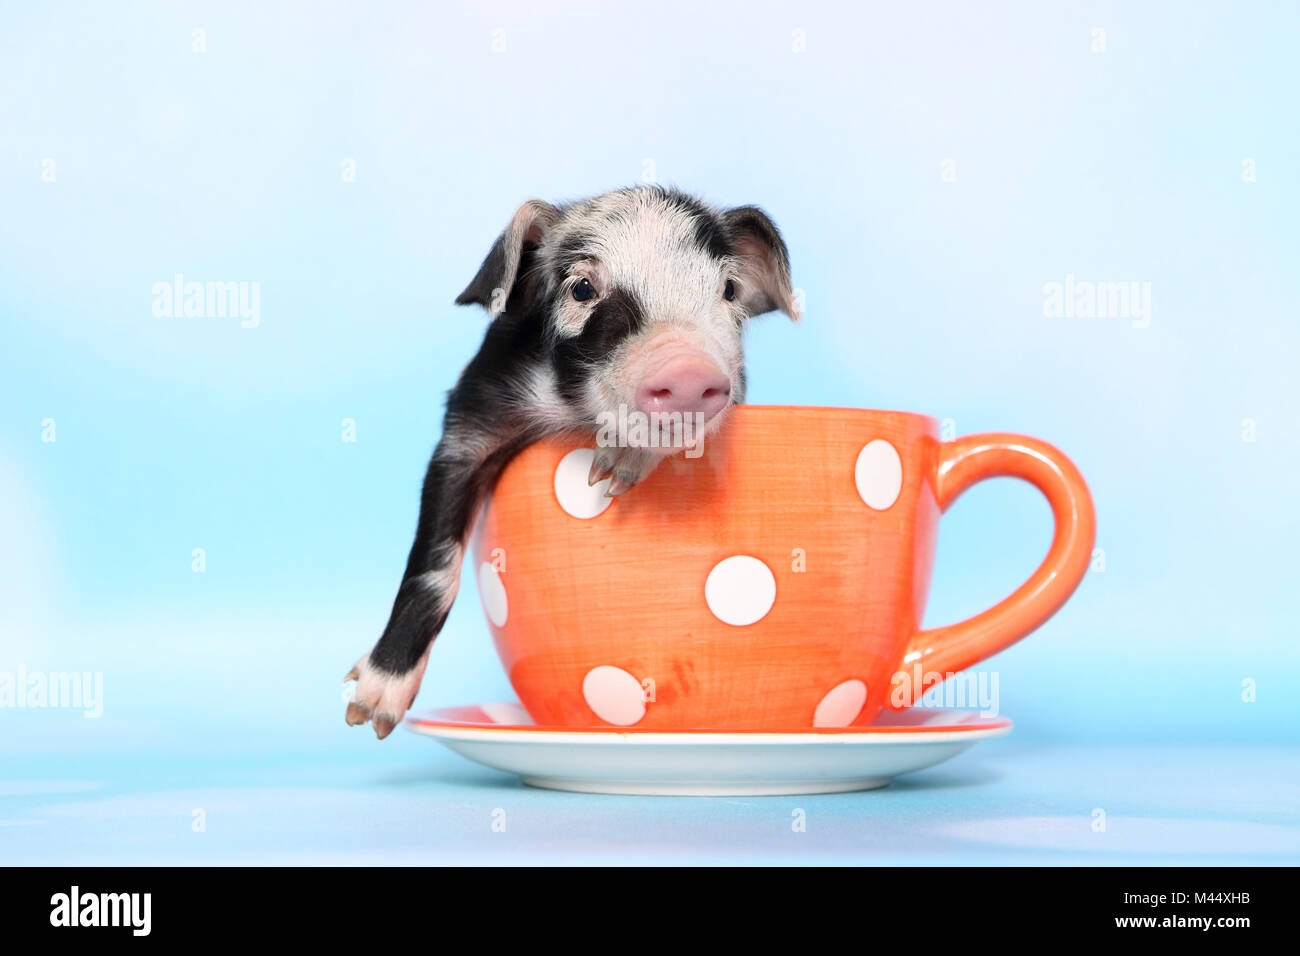 Domestic Pig, Turopolje x ?. Piglet (1 week old) in a big orange cup with polka dots. Studio picture seen against a light blue background. Germany Stock Photo